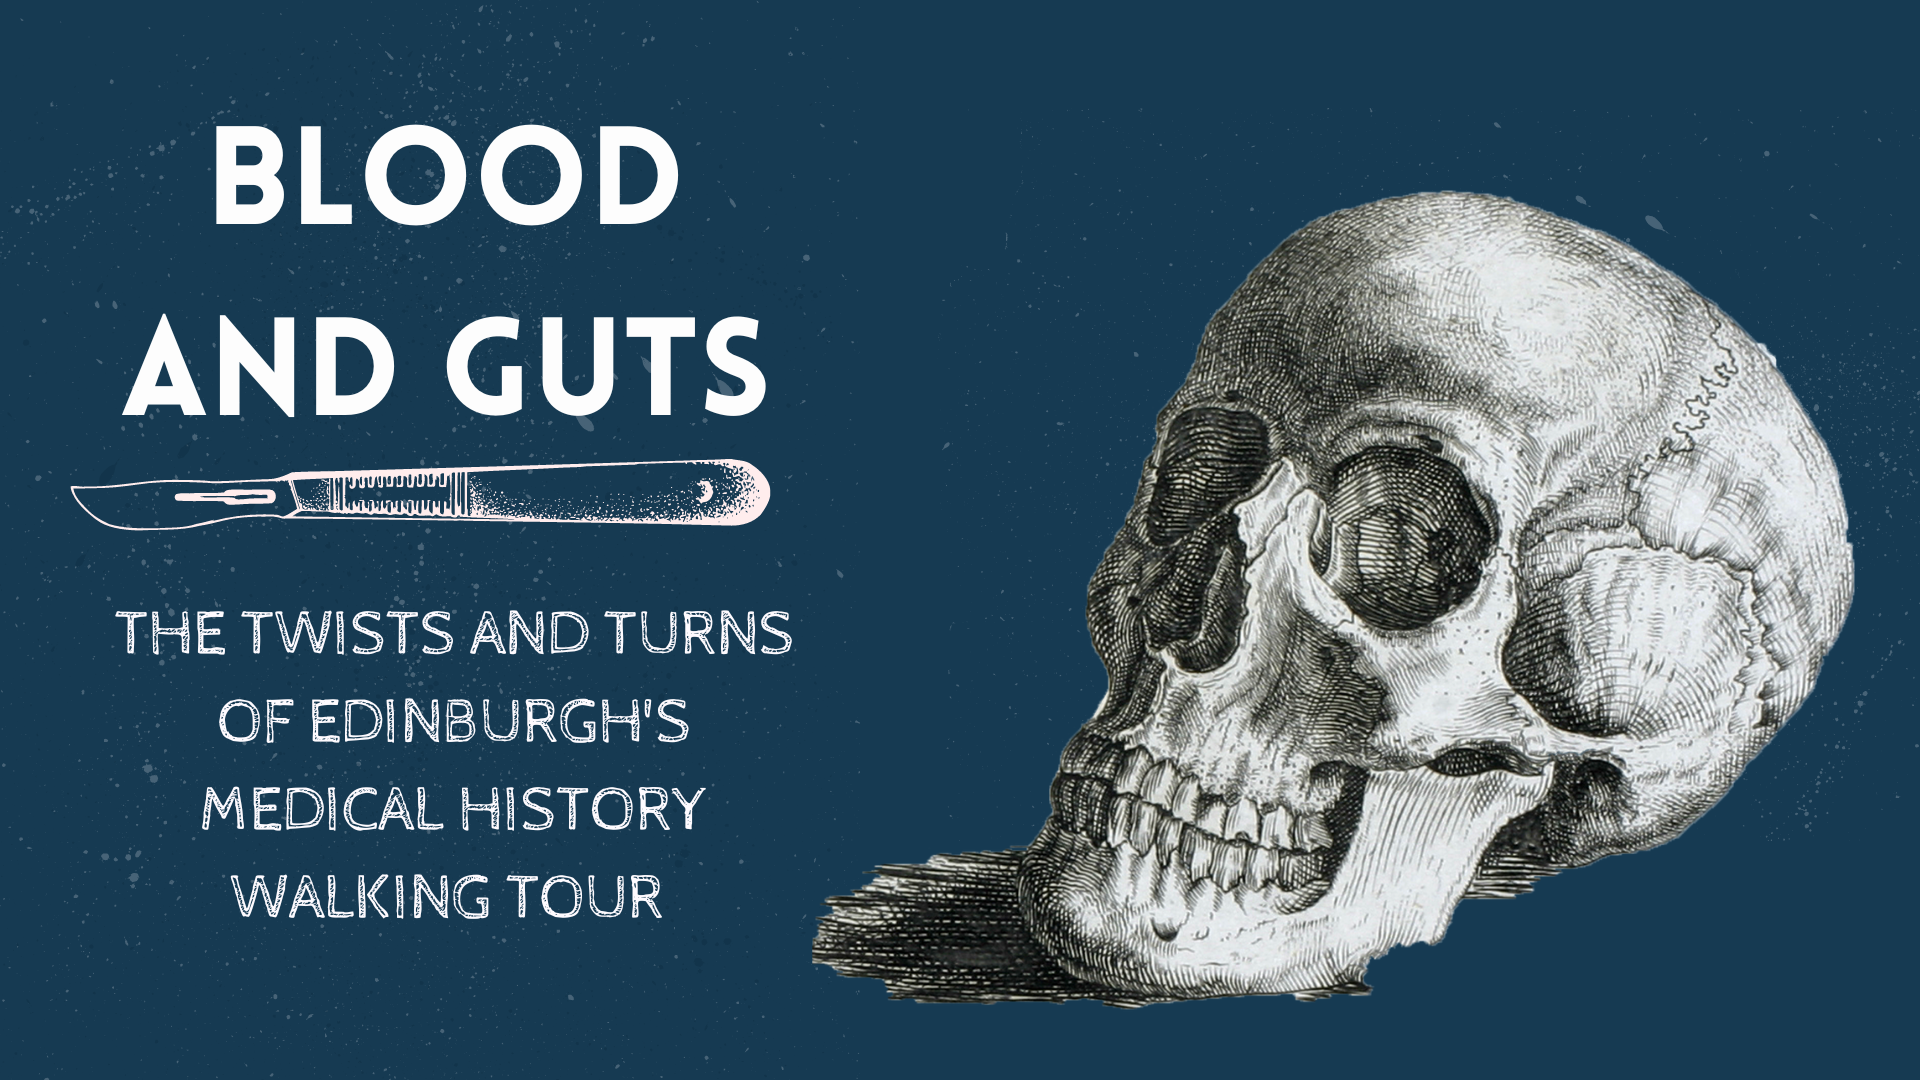 Blood and Guts: The Twists and Turns of Edinburgh's Medical History walking tour